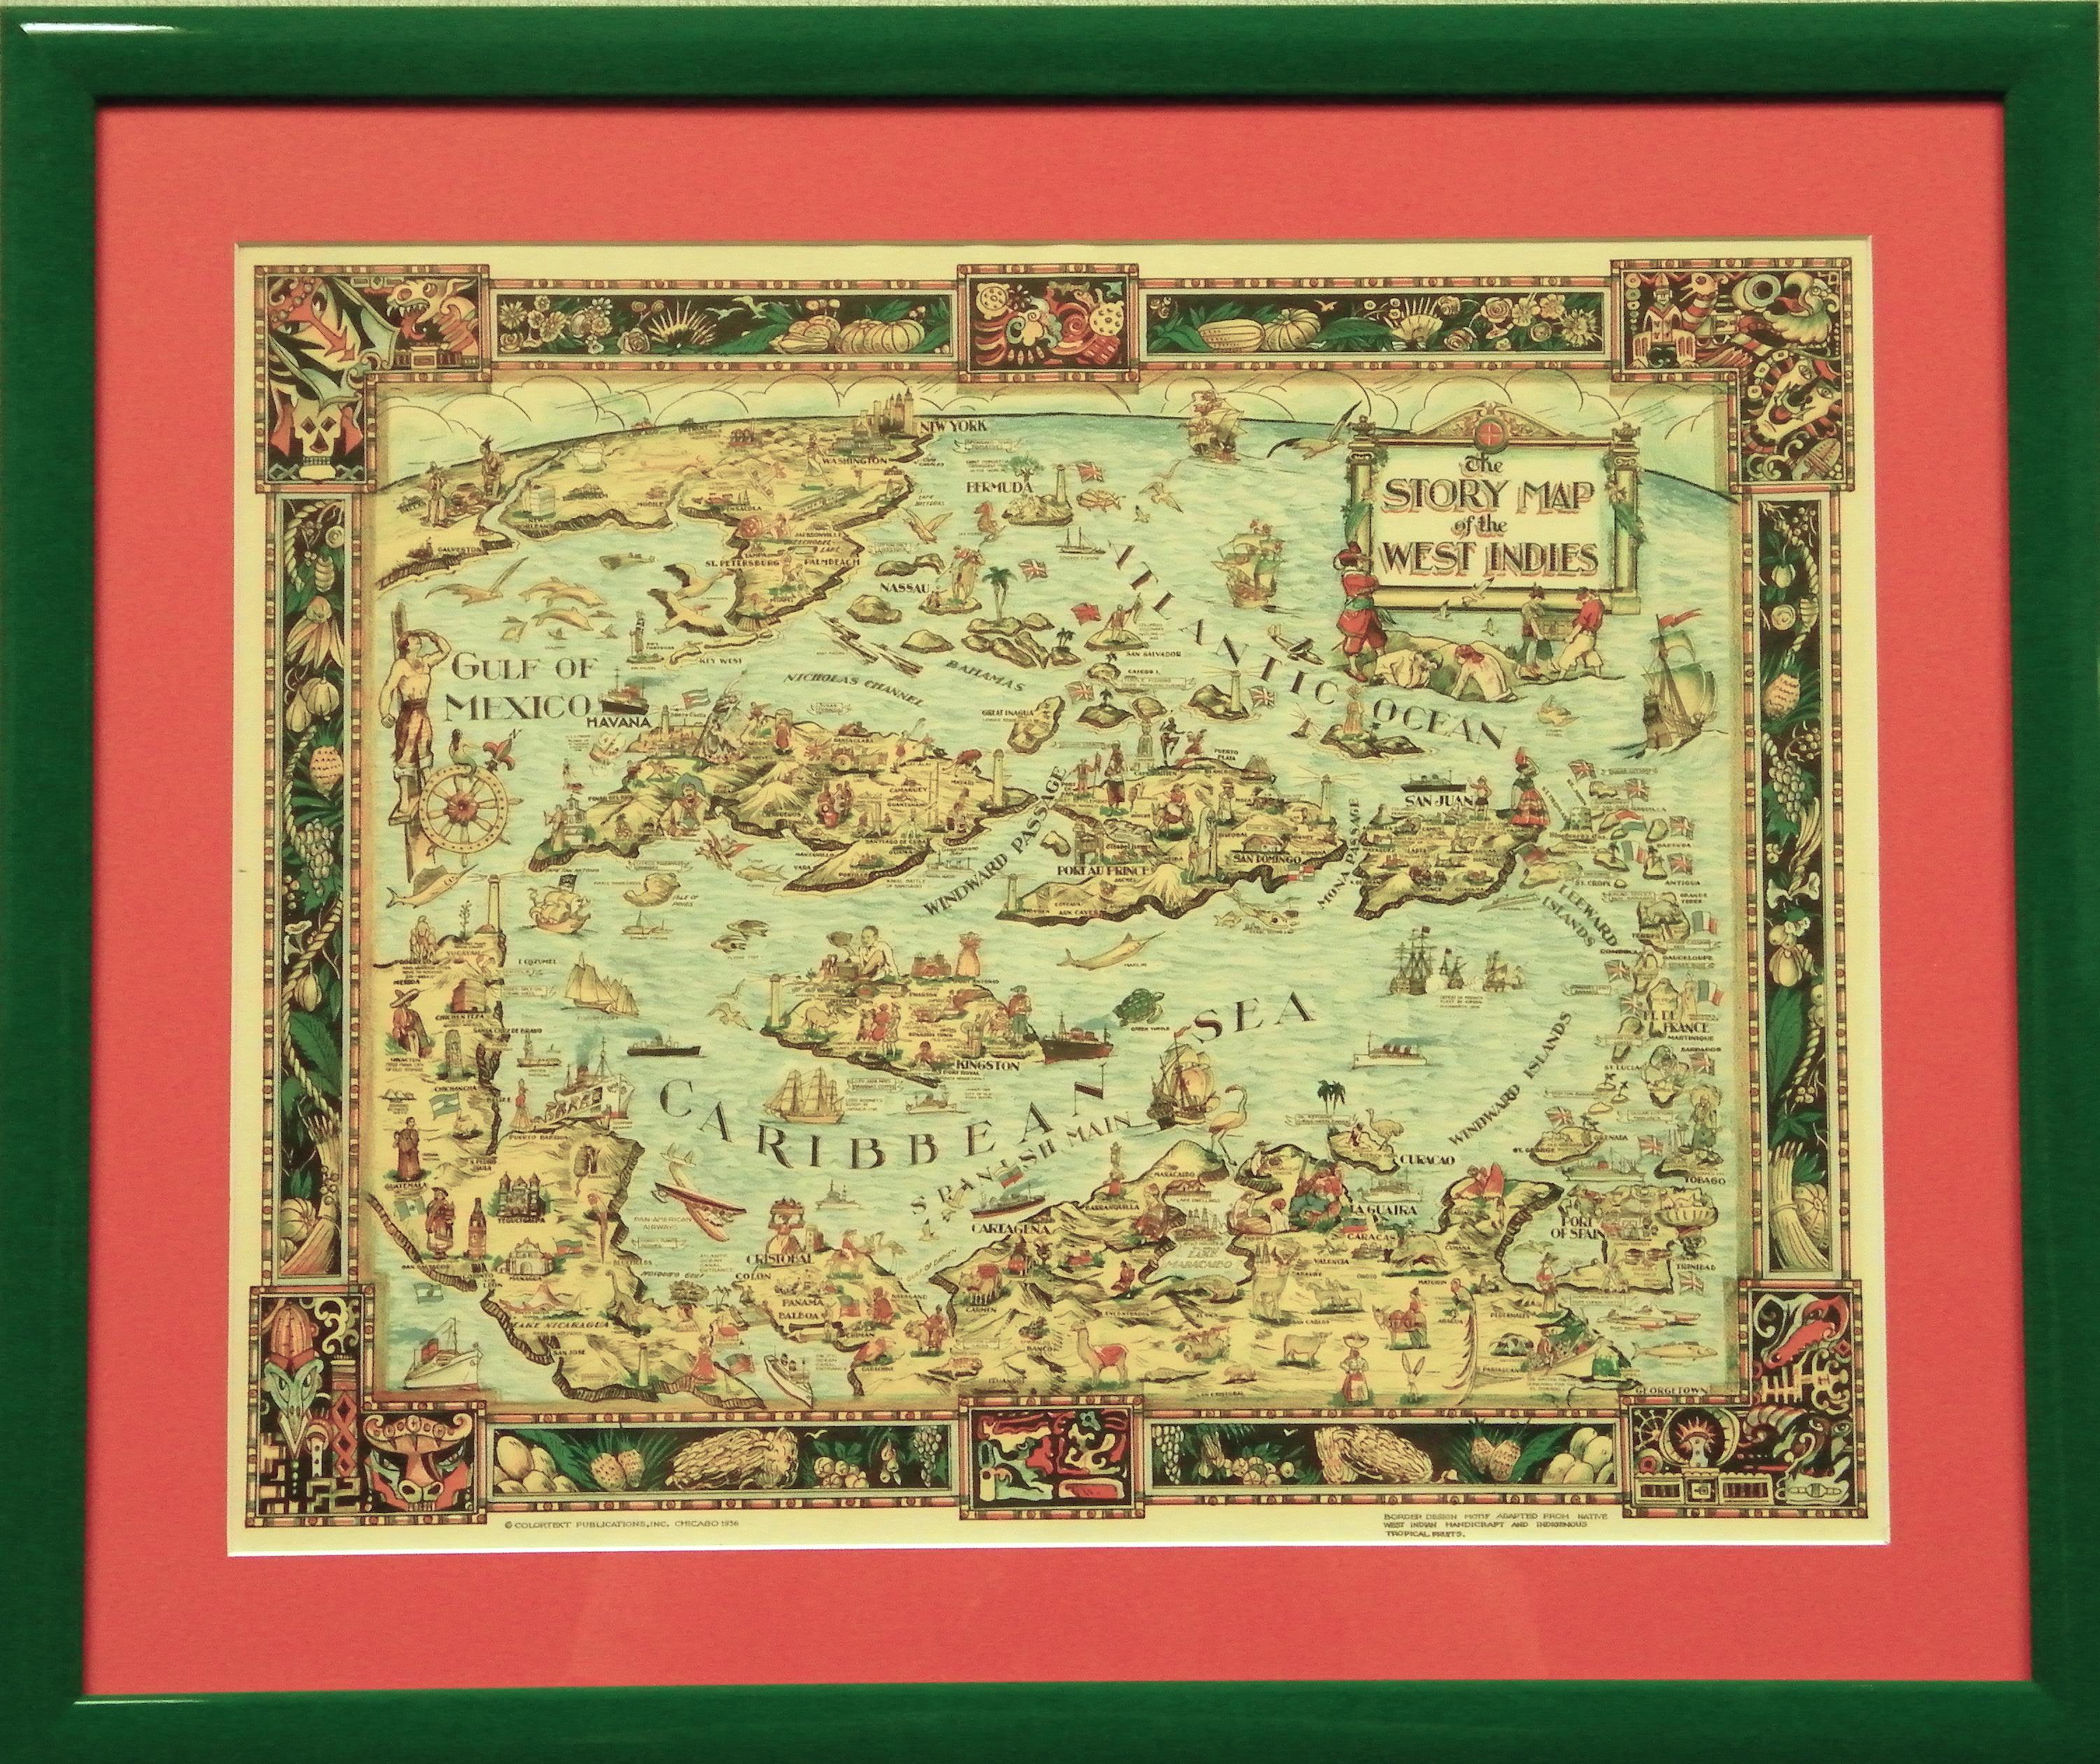 Unknown Print - "The Story Map Of The West Indies" 1936